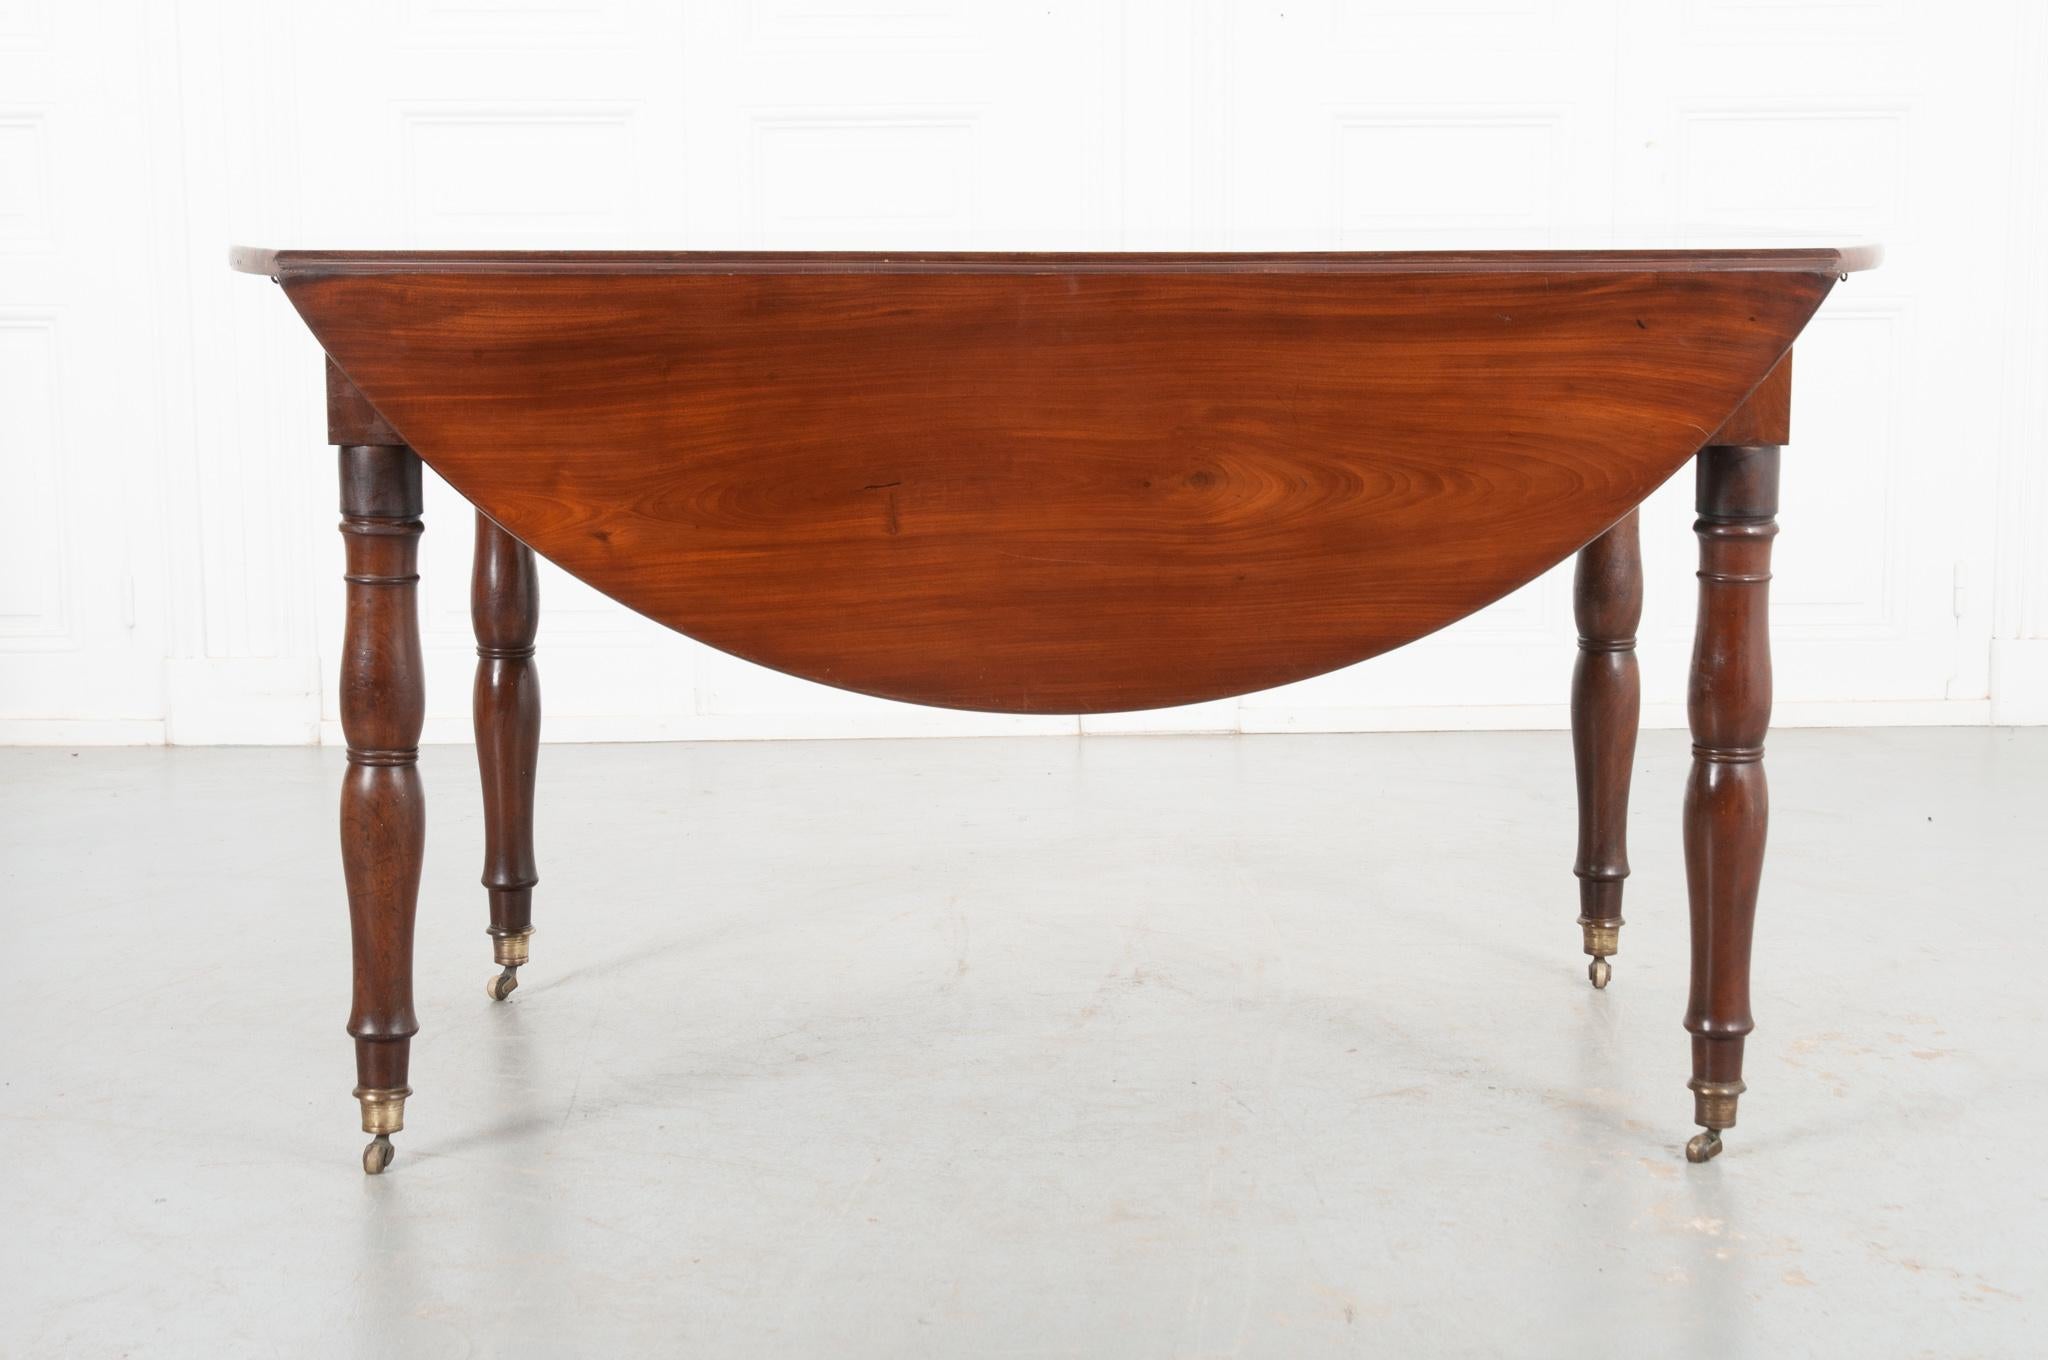 This is an elegant drop leaf table from 19th century France, made from a rich mahogany that's been polished for an exceptional shine. In the past this table also extended from the center, however it is now stationary. The beautiful turned legs